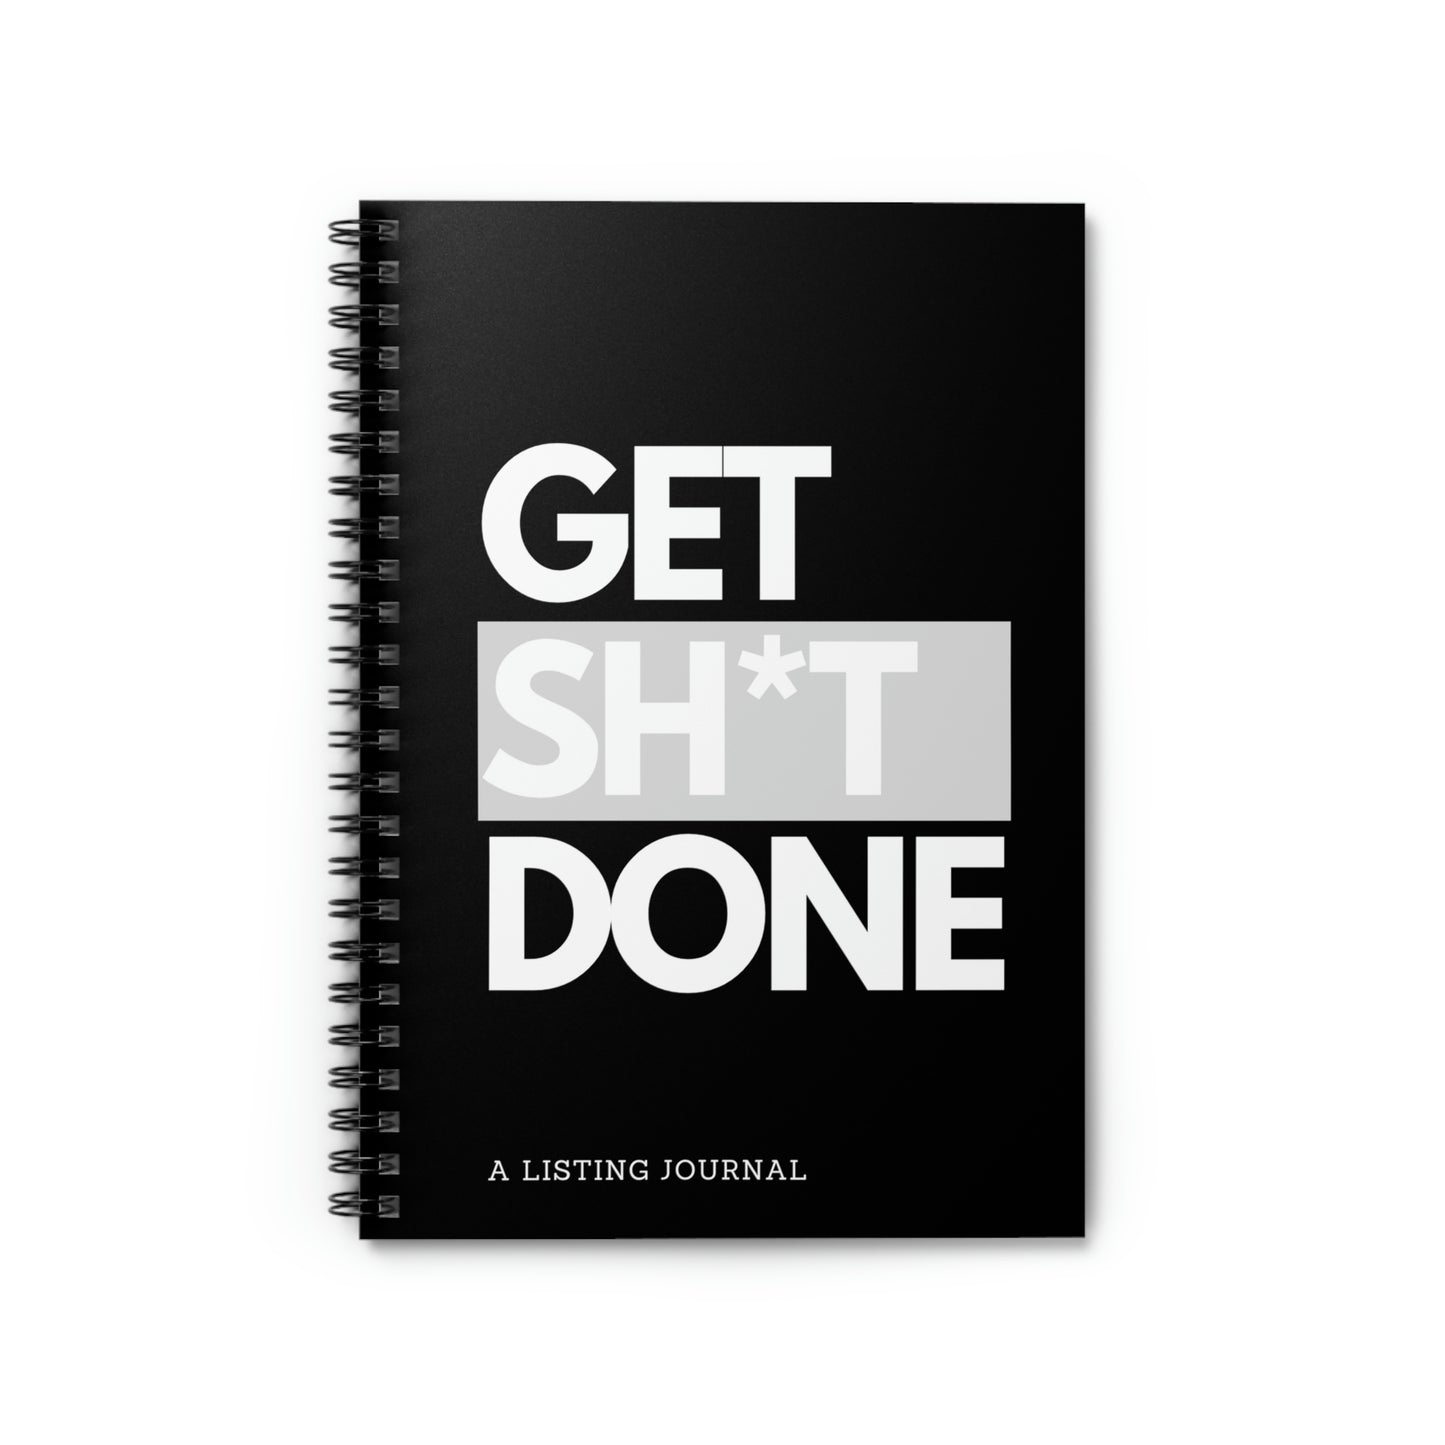 Get Sh*t Done Spiral Notebook - Ruled Line